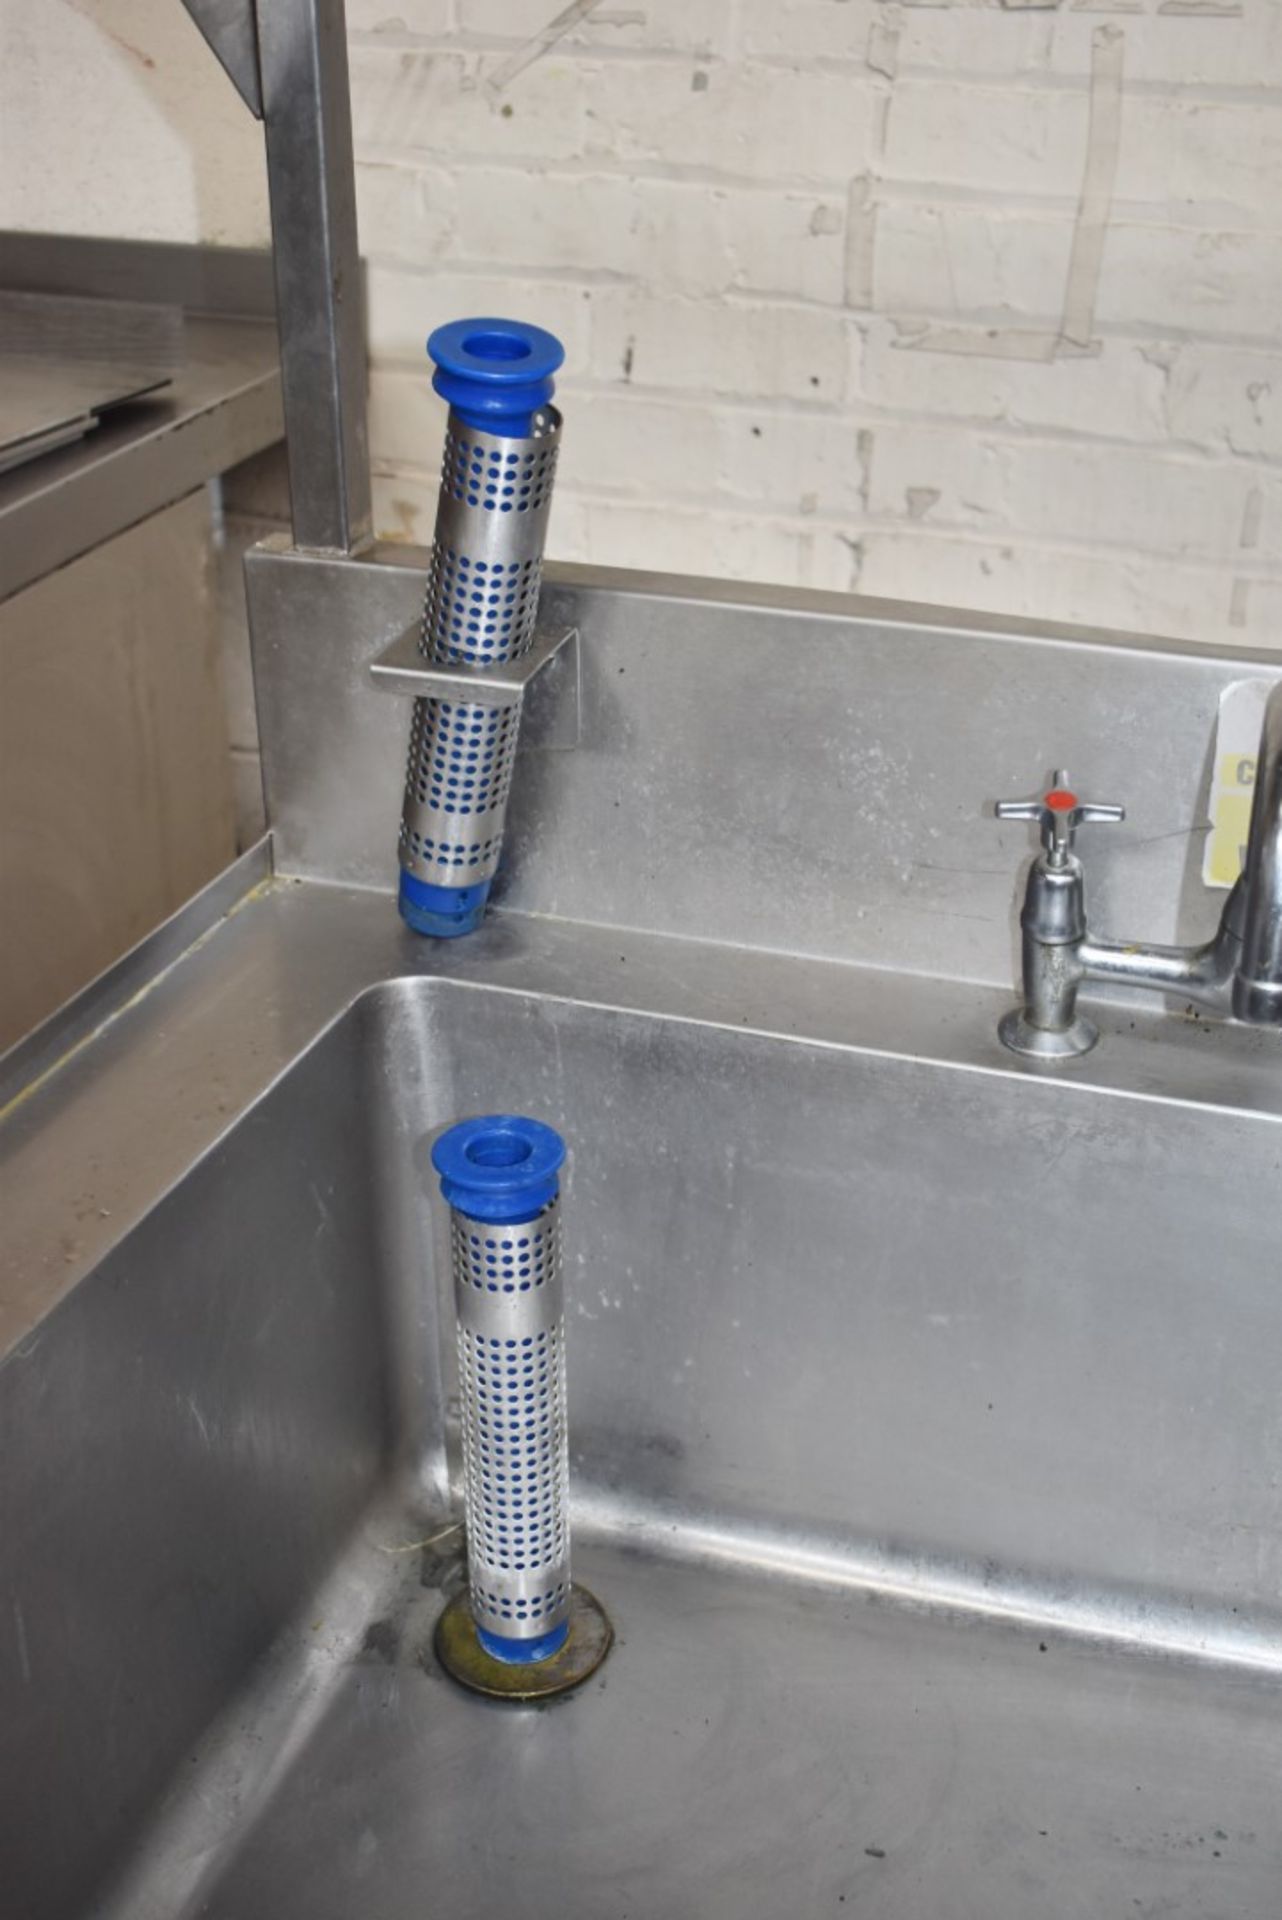 1 x Stainless Steel Commercial Wash Basin With Large Basin, Mixer Tap, Detergent Dispensers and Over - Image 5 of 9